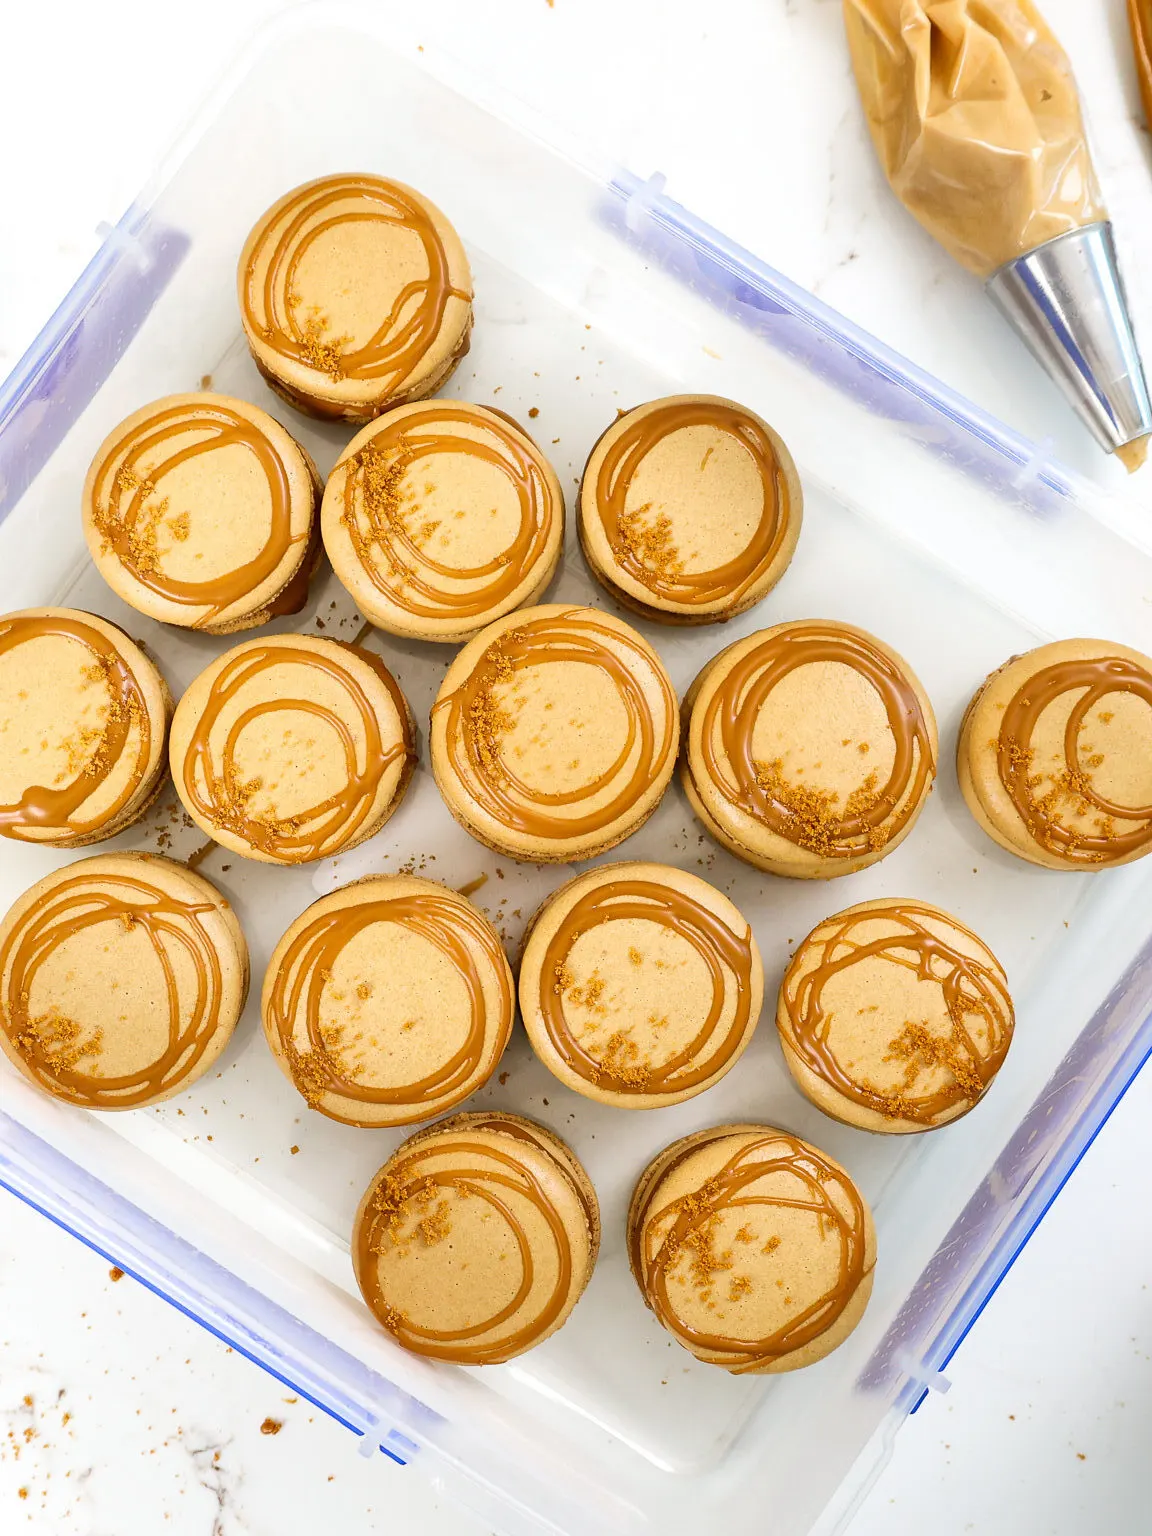 image of biscoff cookie butter macarons that have been placed in an airtight container to mature in the fridge overnight